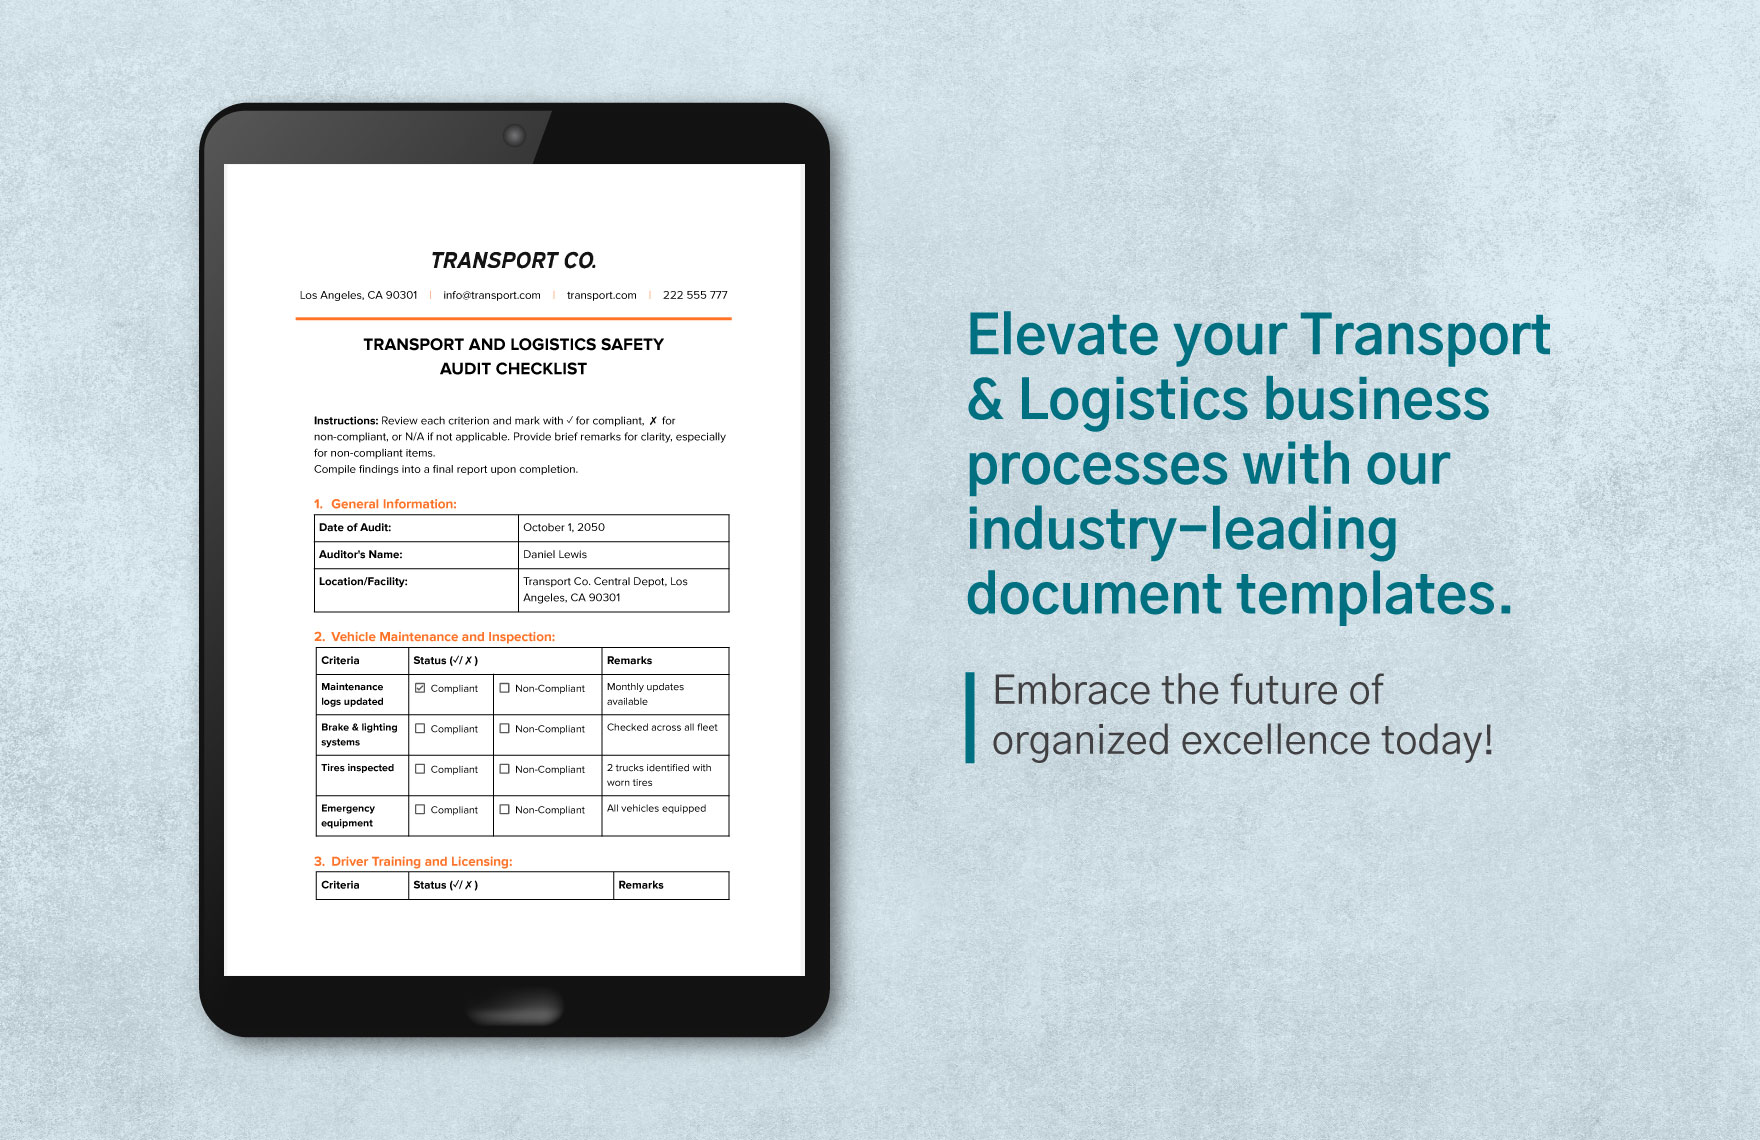 Transport and Logistics Safety Audit Checklist Template